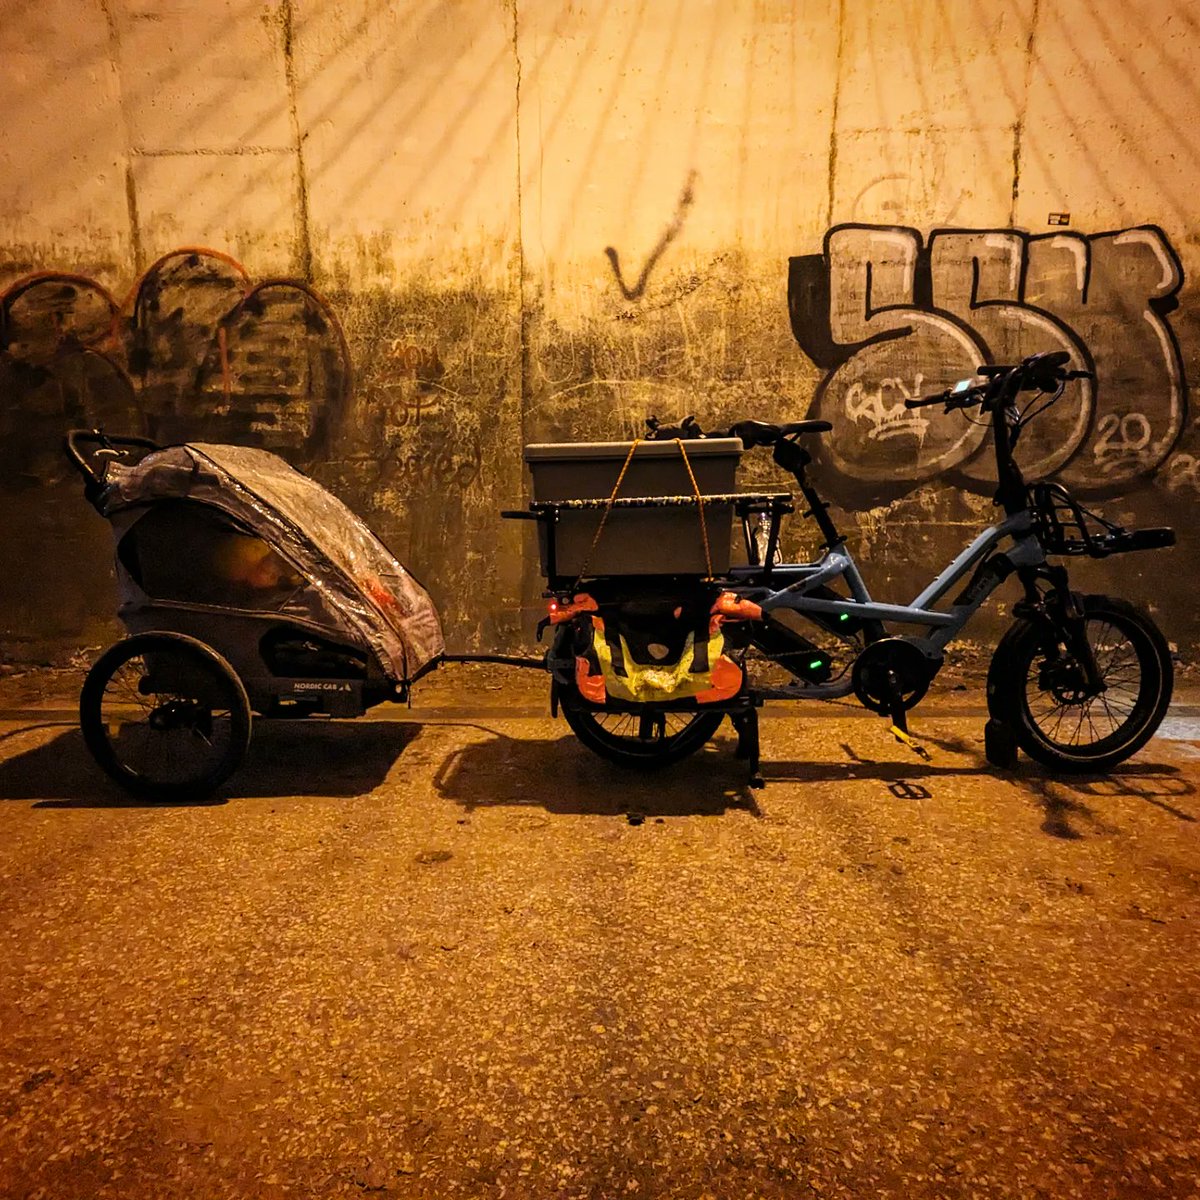 I decided on a longer ride to do the weekly shop so took the trans-penine trail to penistone in the pouring rain, we're not made of sugar eh. Halley might not have been impressed but I loved it. 

#tern #ecargo #cargobike #leavethecareathome #getshitdone #betterbybike